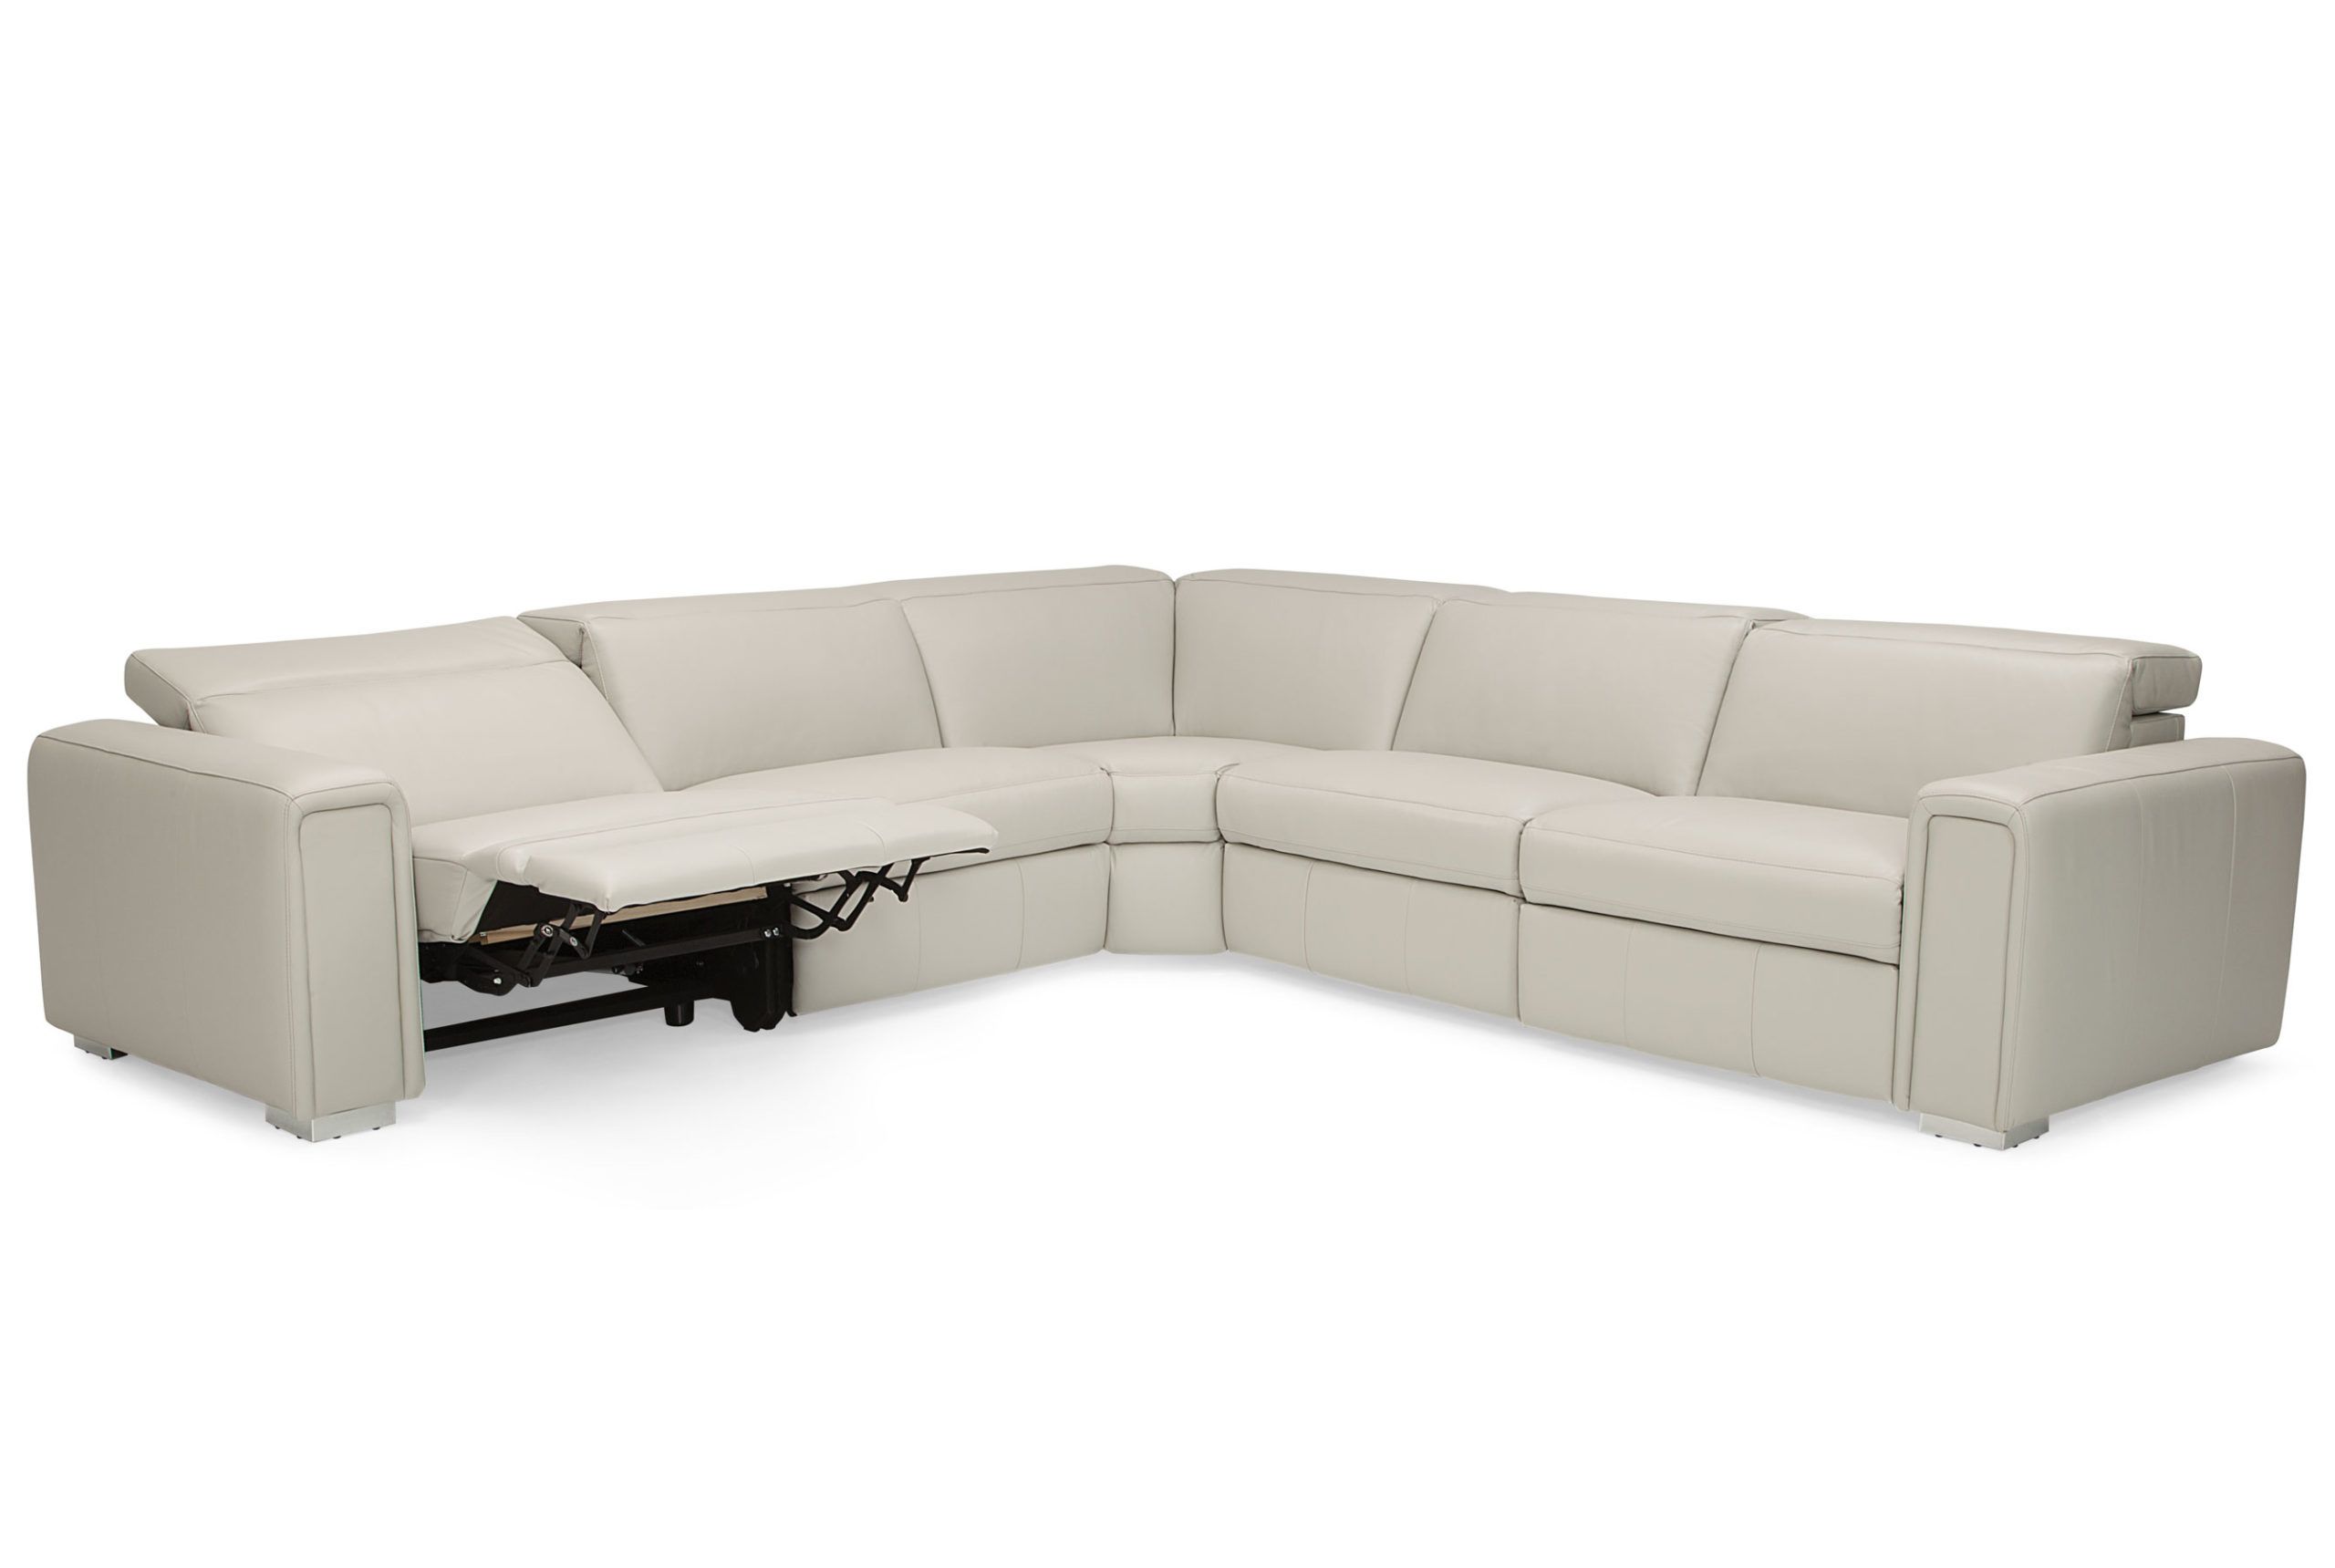 Palliser Titan 44004 Reclining Sectional With Power Intended For Titan Leather Power Reclining Sofas (View 3 of 15)